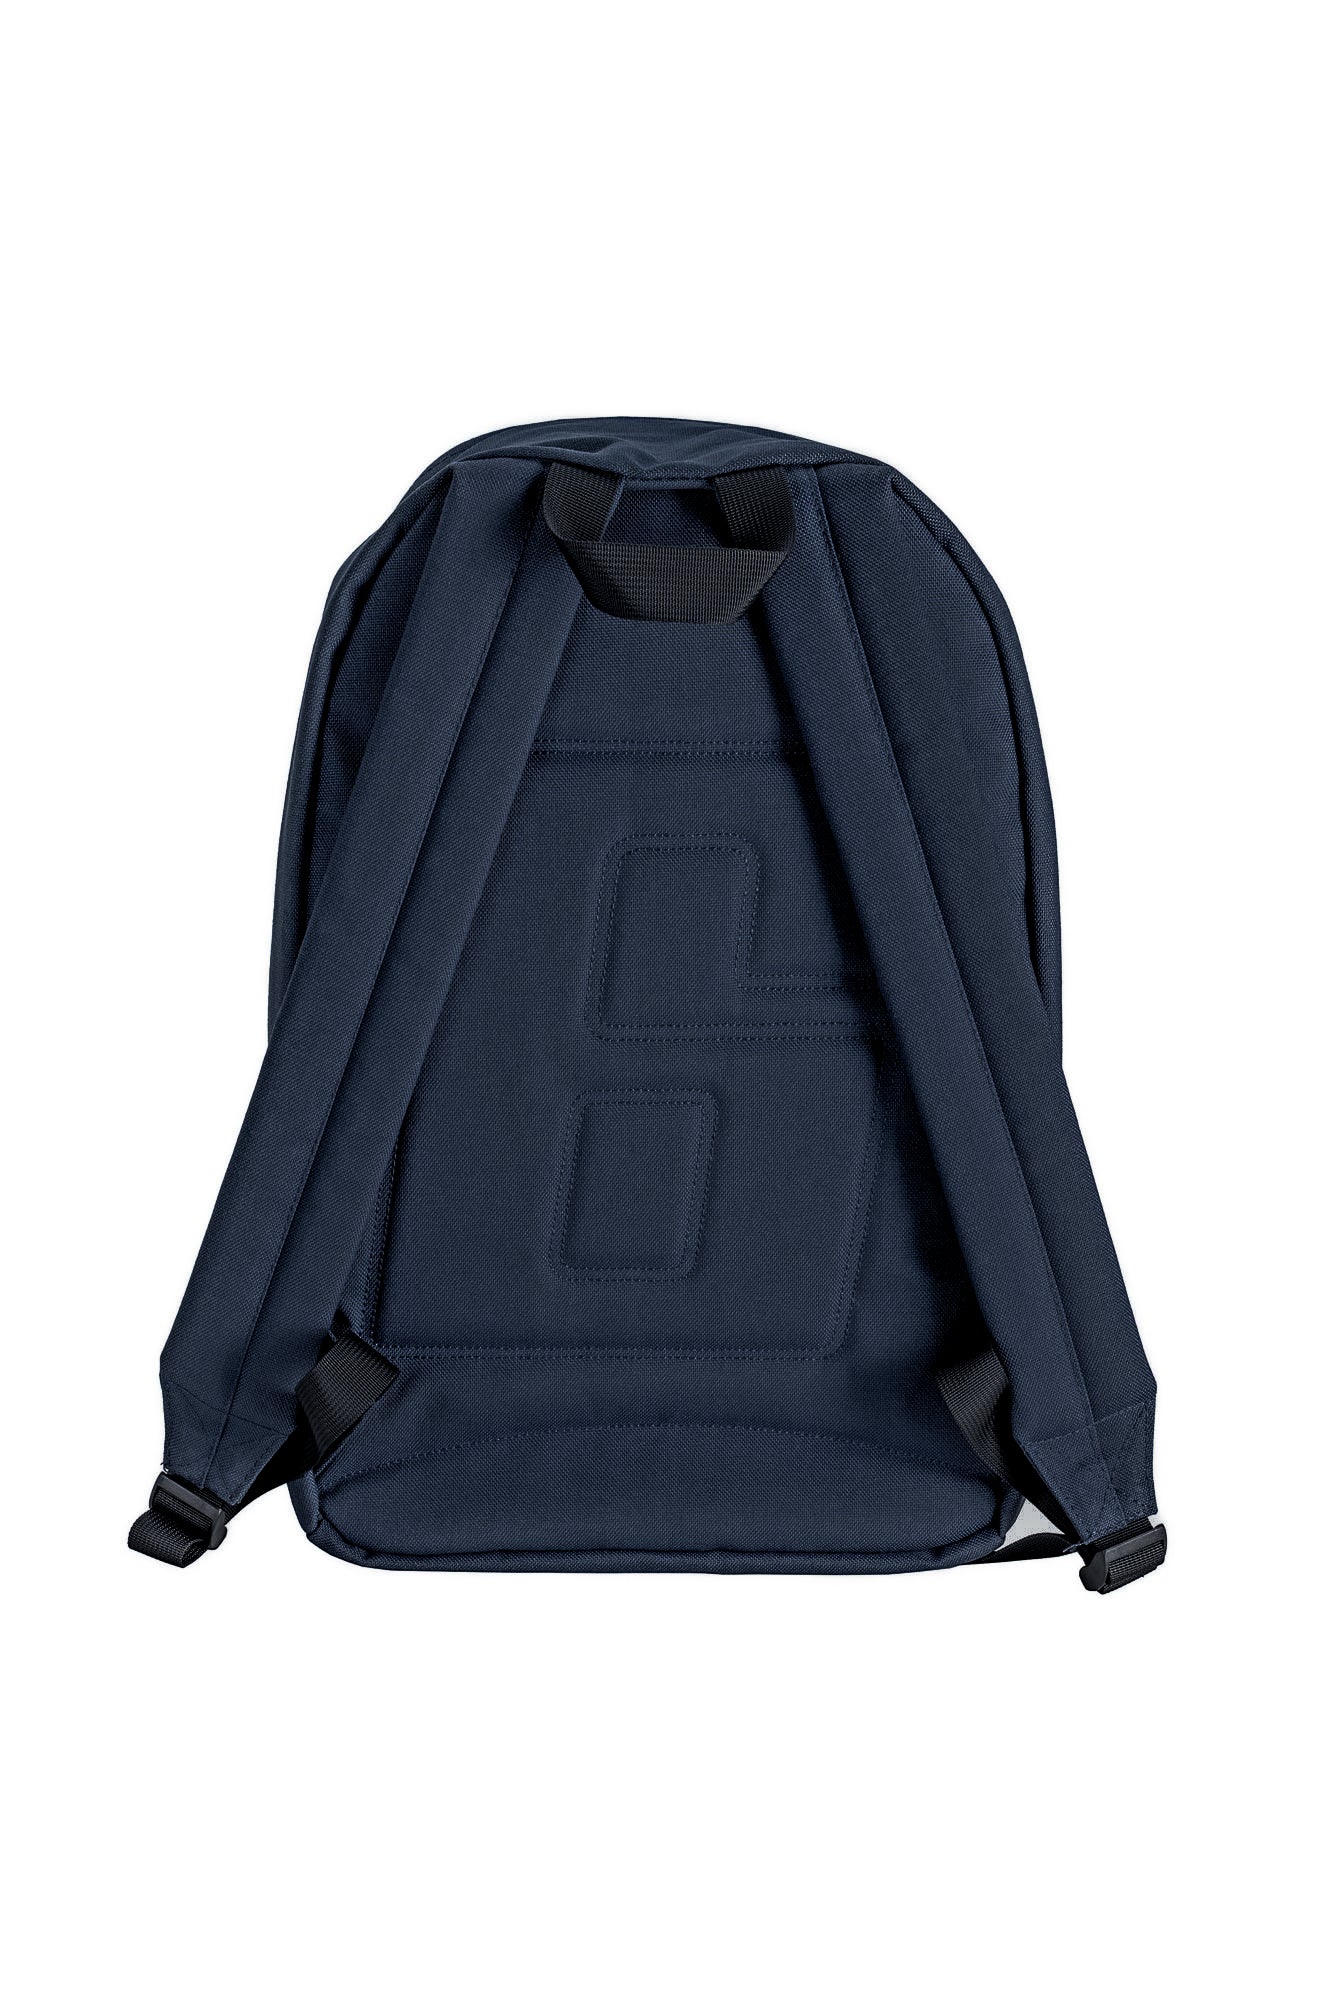 EVERYDAY BACKPACK NAVY